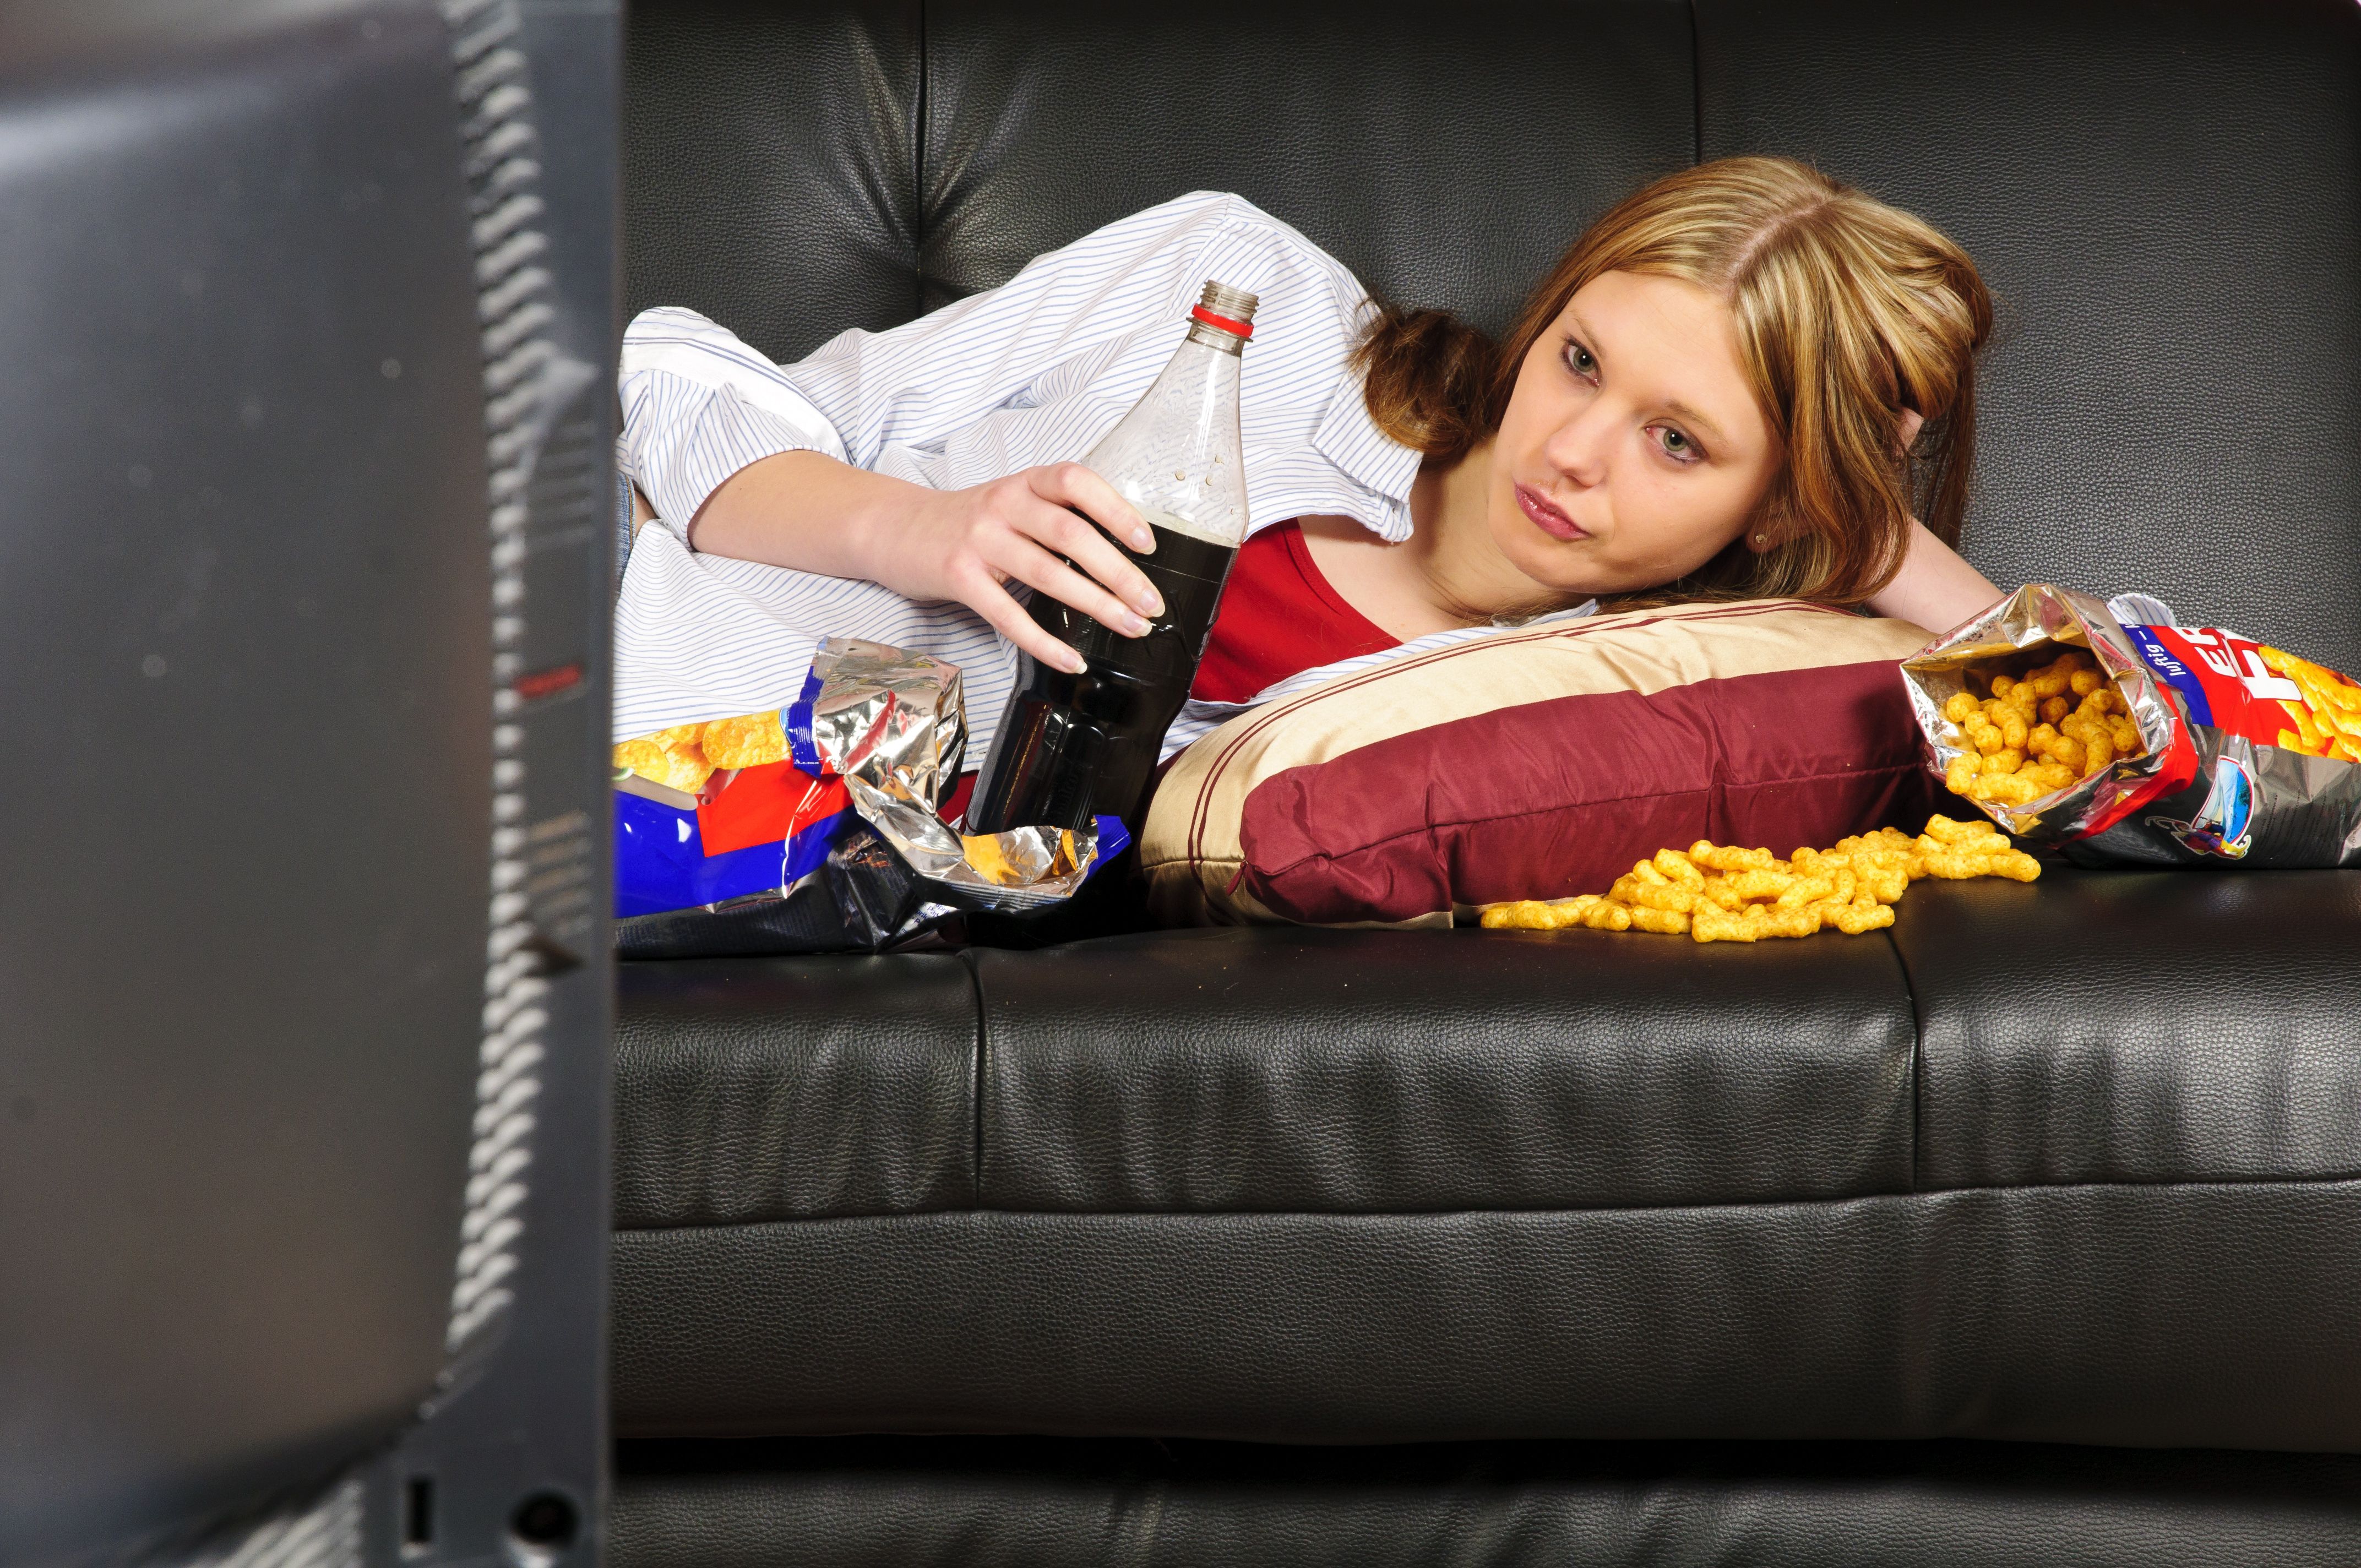 teen girl on couch with junk food